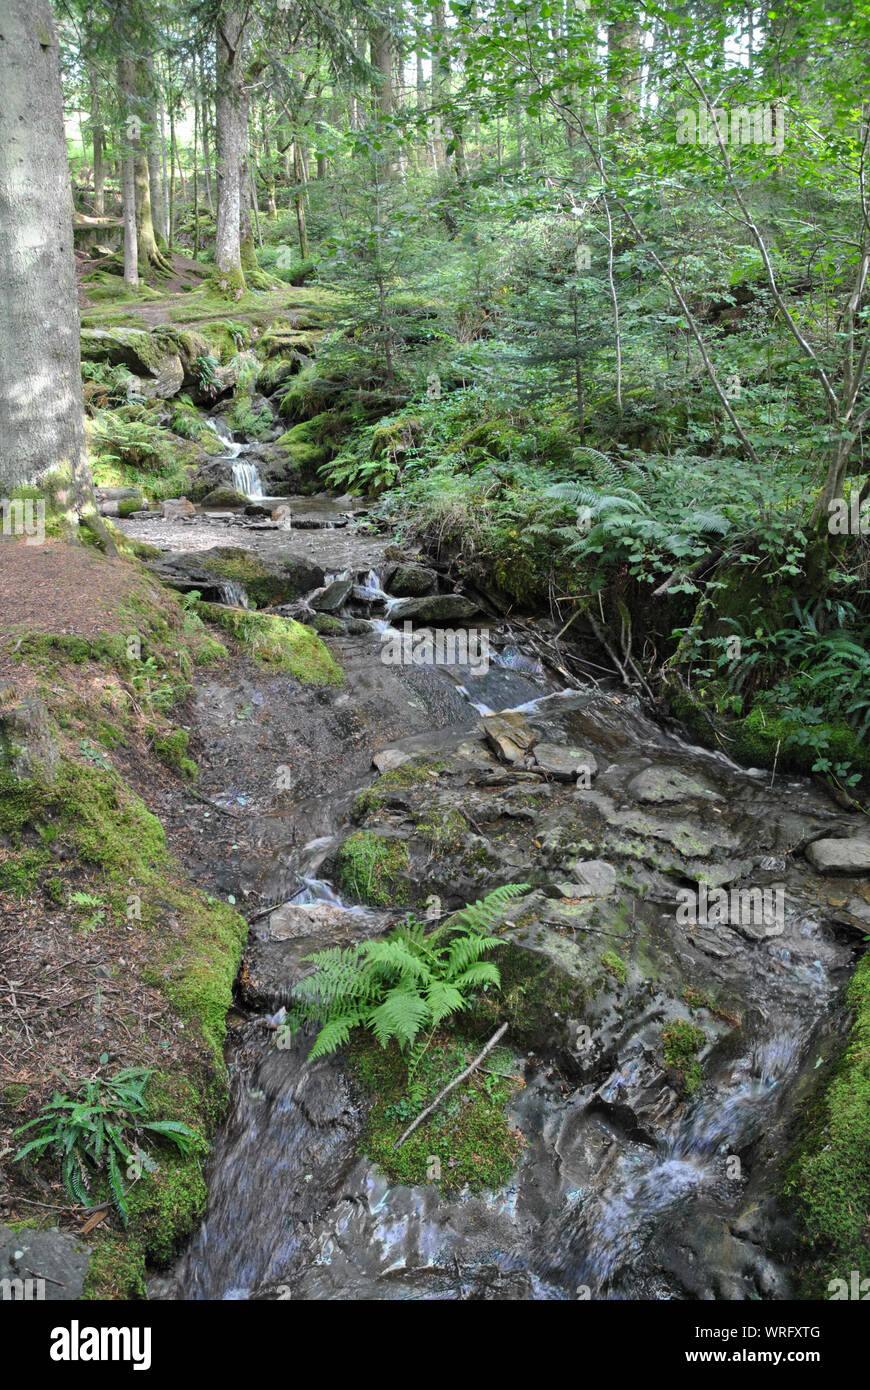 A stream flowing through a woodland environment Stock Photo